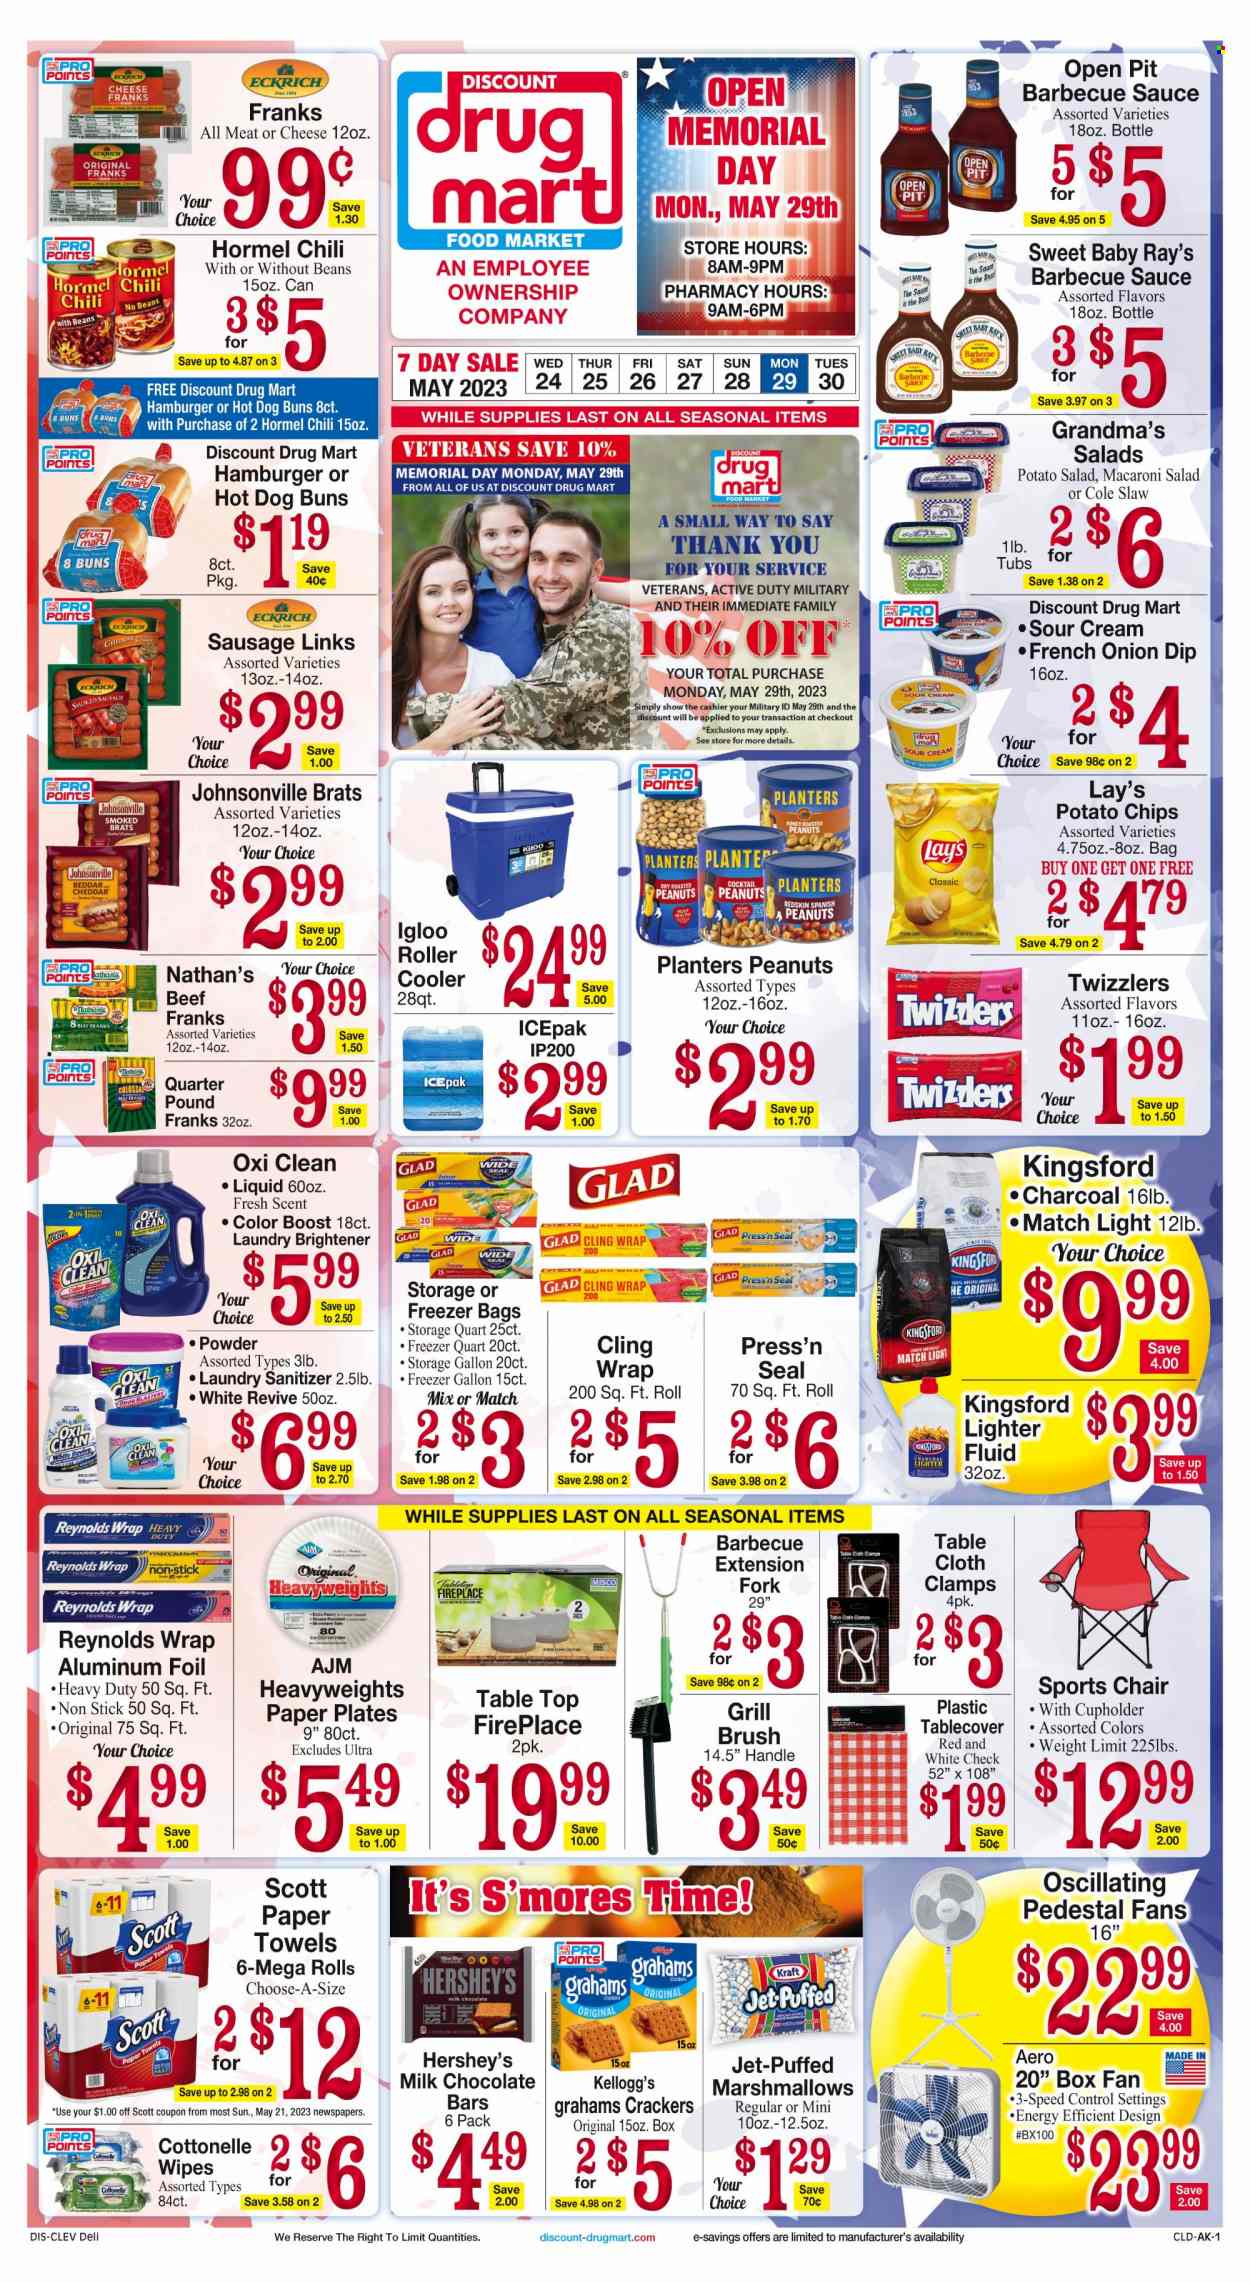 thumbnail - Discount Drug Mart Flyer - 05/24/2023 - 05/30/2023 - Sales products - buns, cherries, Kraft®, Hormel, Kingsford, Johnsonville, sausage, smoked sausage, frankfurters, potato salad, macaroni salad, cheese, sour cream, dip, Hershey's, marshmallows, milk chocolate, crackers, Kellogg's, potato chips, chips, Lay’s, BBQ sauce, roasted peanuts, peanuts, Planters, Boost, wipes, Cottonelle, Scott, kitchen towels, paper towels, laundry detergent, Jet, brush, fork, plate, aluminium foil, freezer bag, paper plate, tablecloth. Page 1.